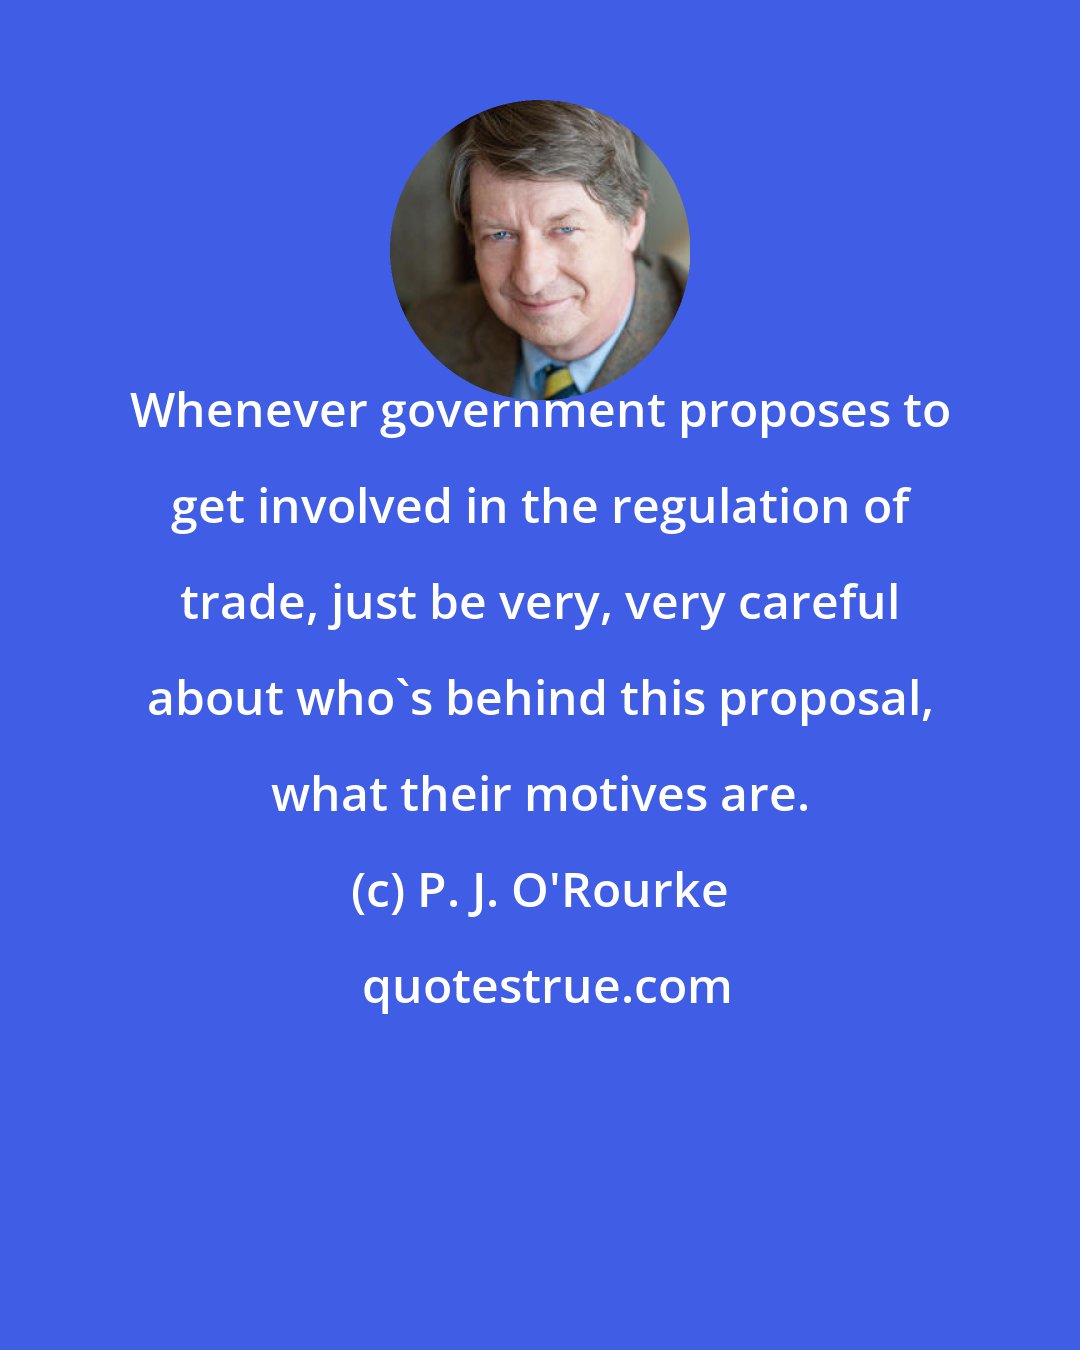 P. J. O'Rourke: Whenever government proposes to get involved in the regulation of trade, just be very, very careful about who's behind this proposal, what their motives are.